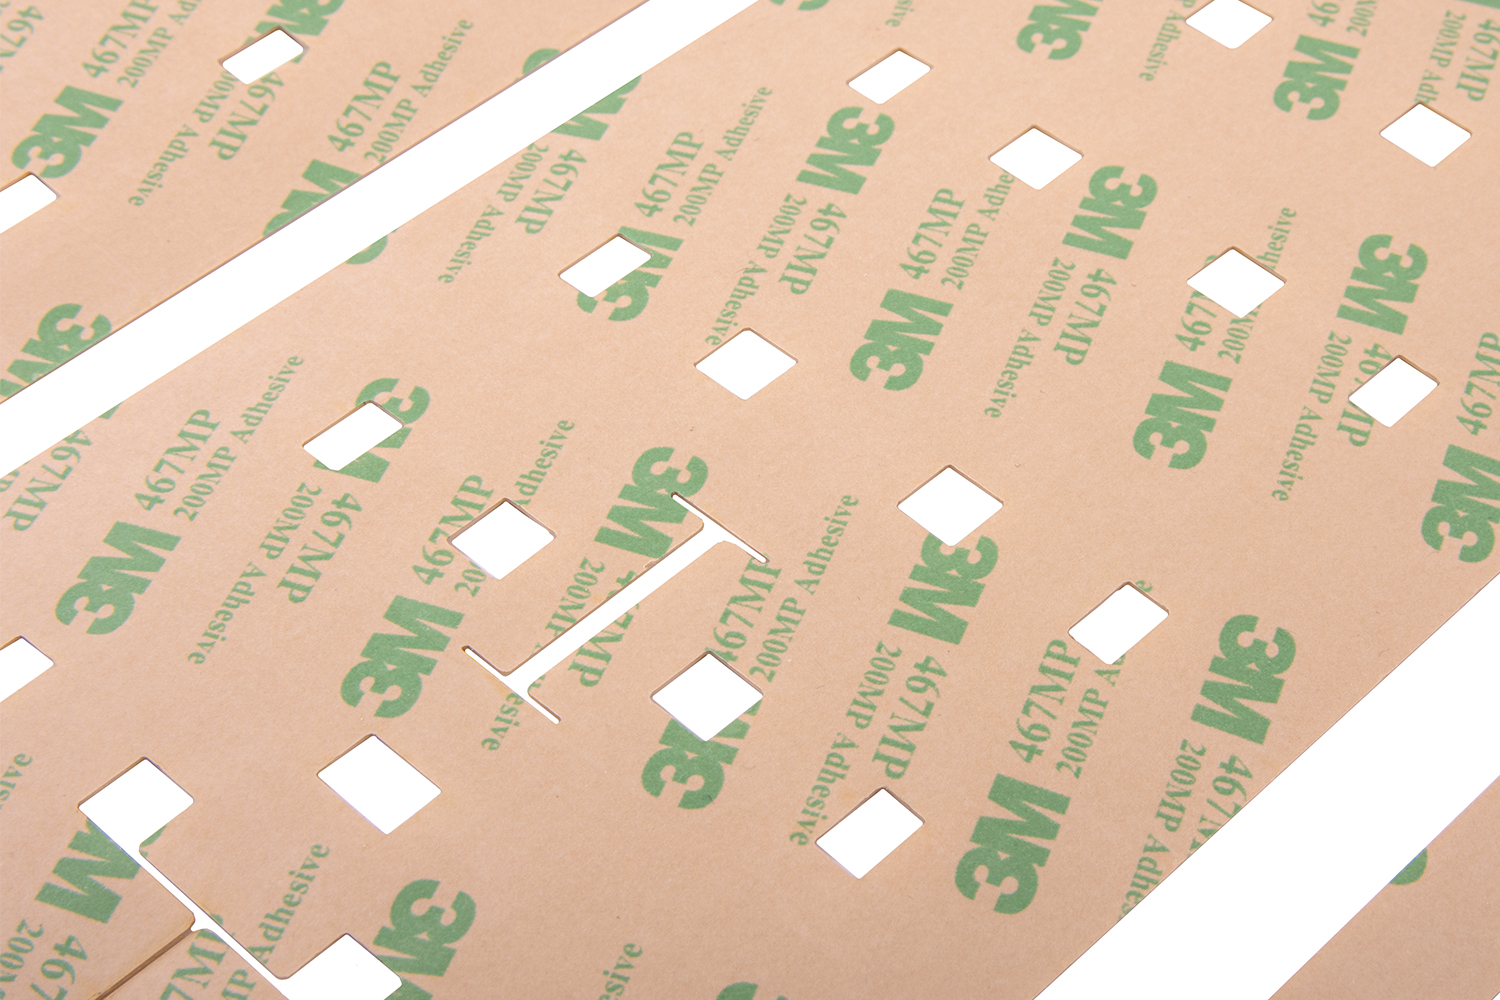 MYLAR-A self-adhesive solutions